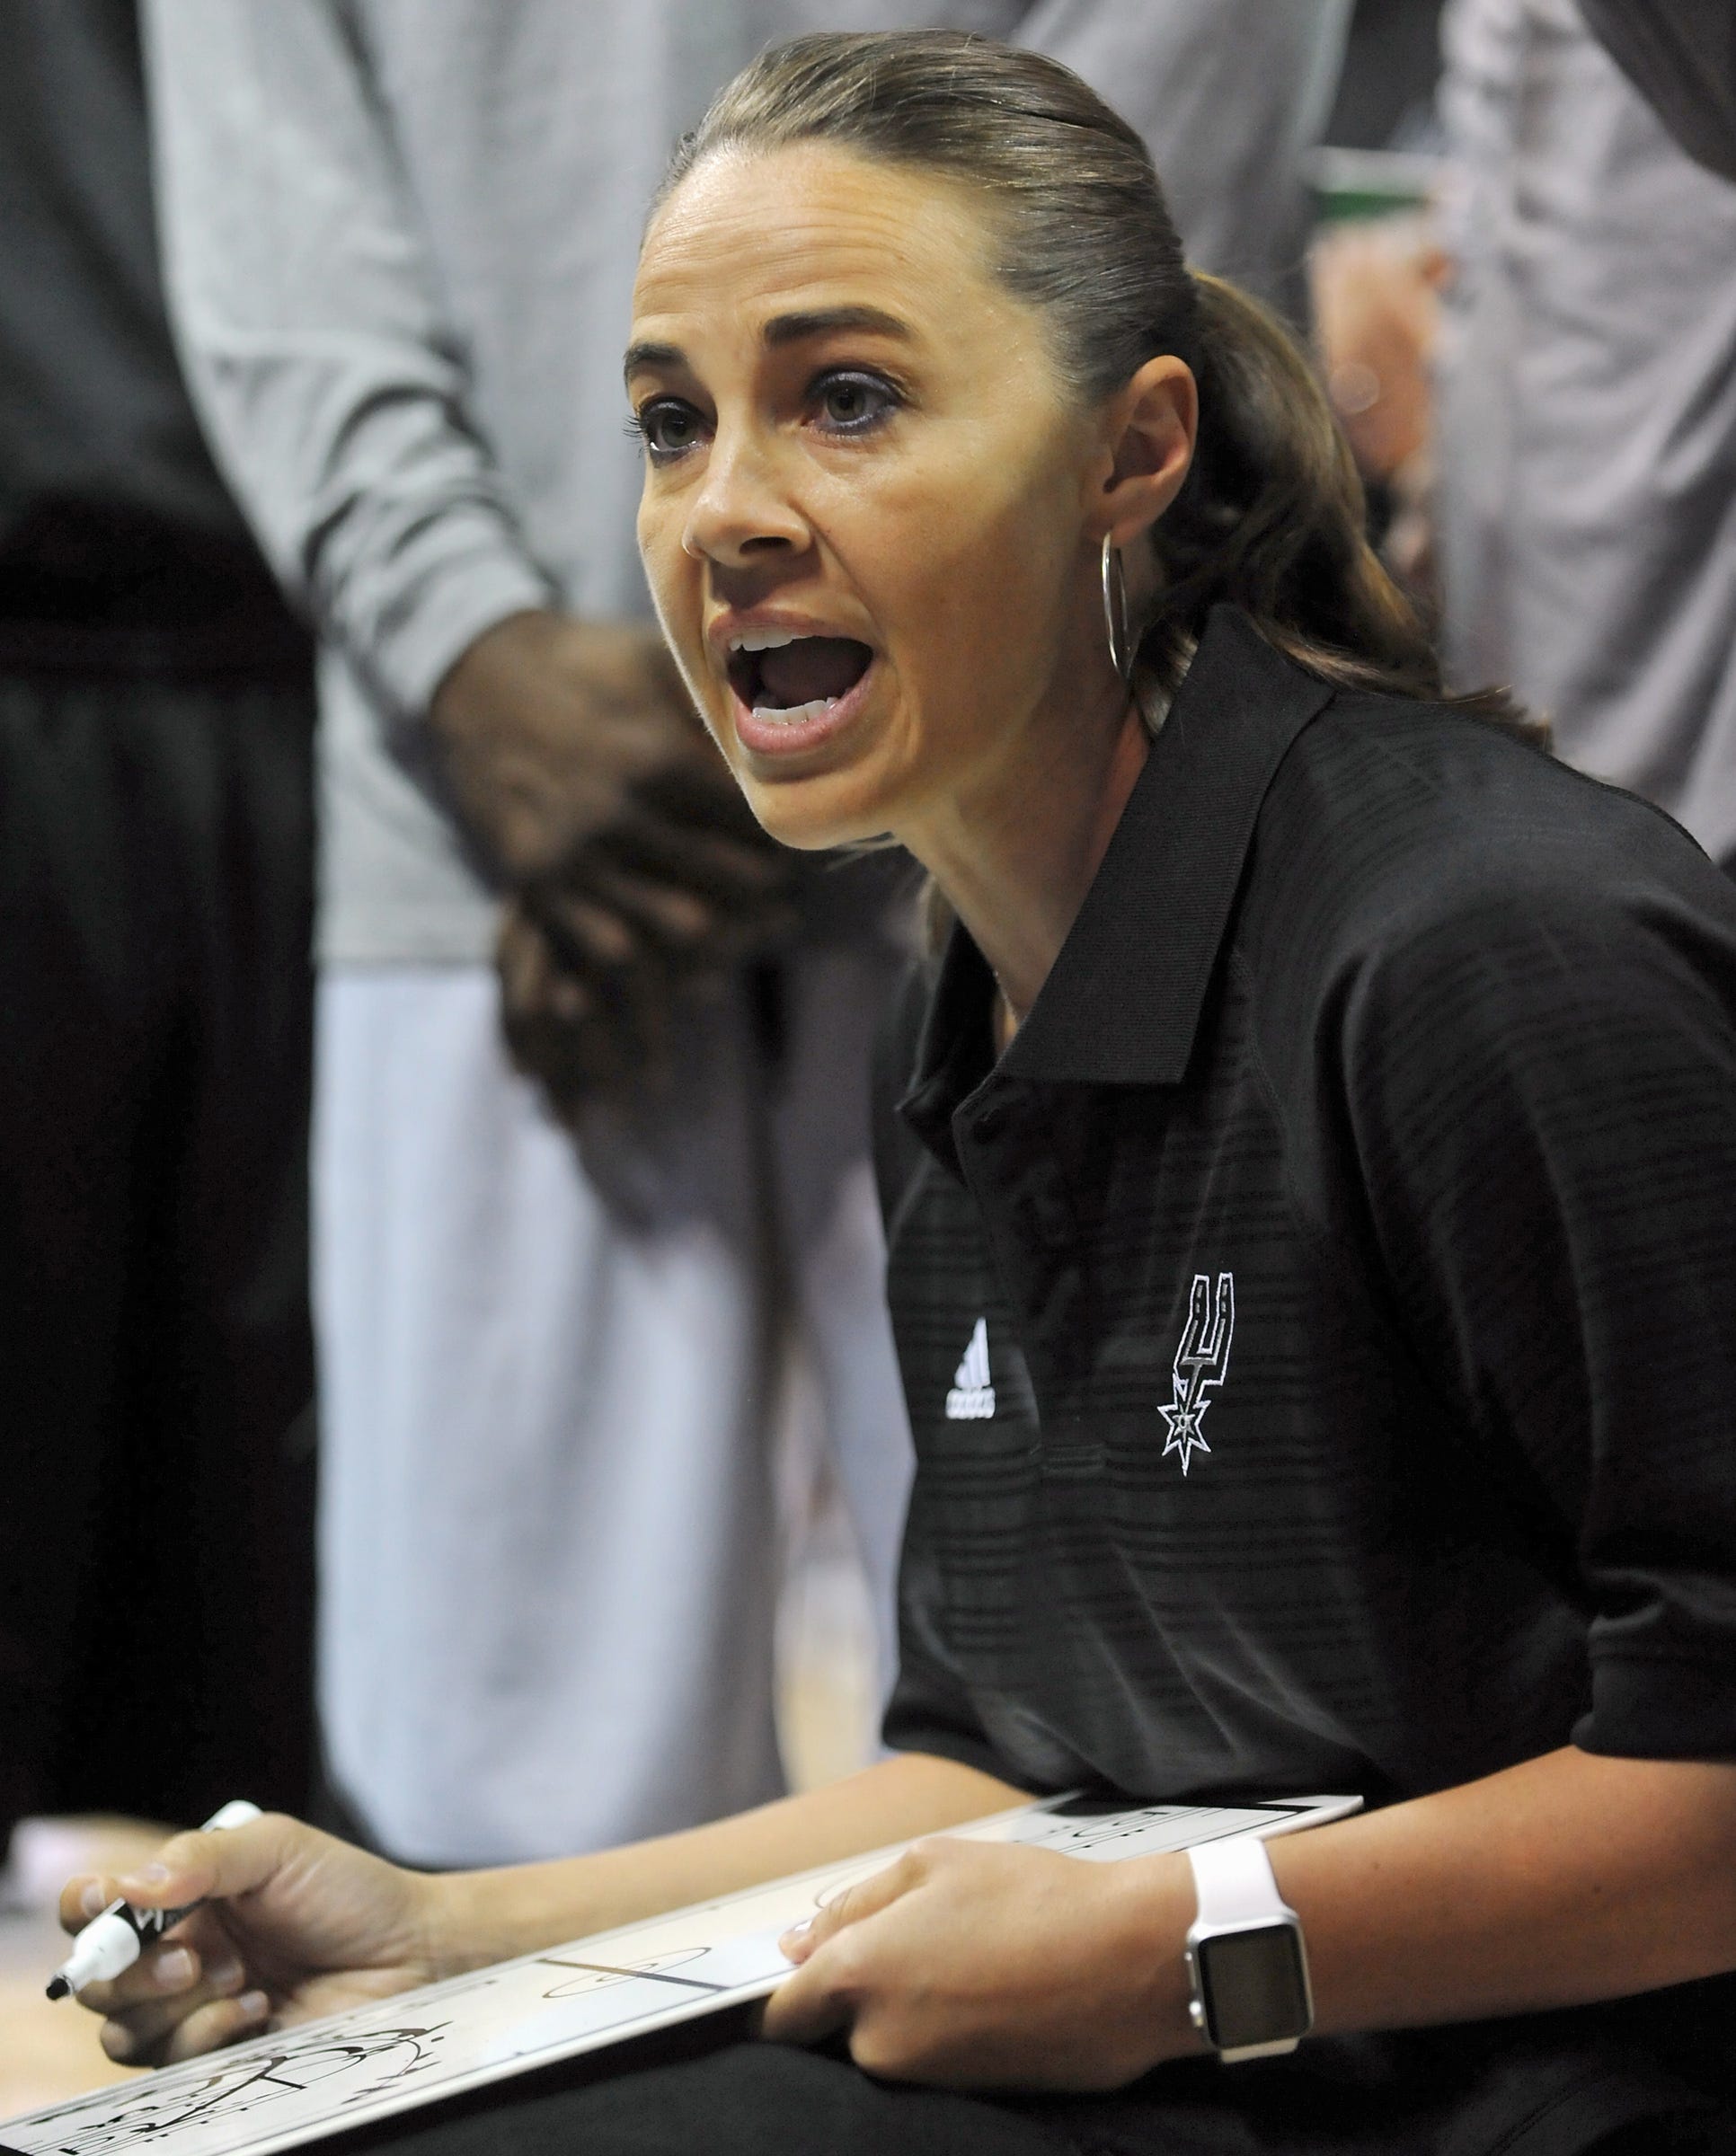 Hiring Becky Hammon to head coaching job will shake up NBA. Is now the time it will happen?